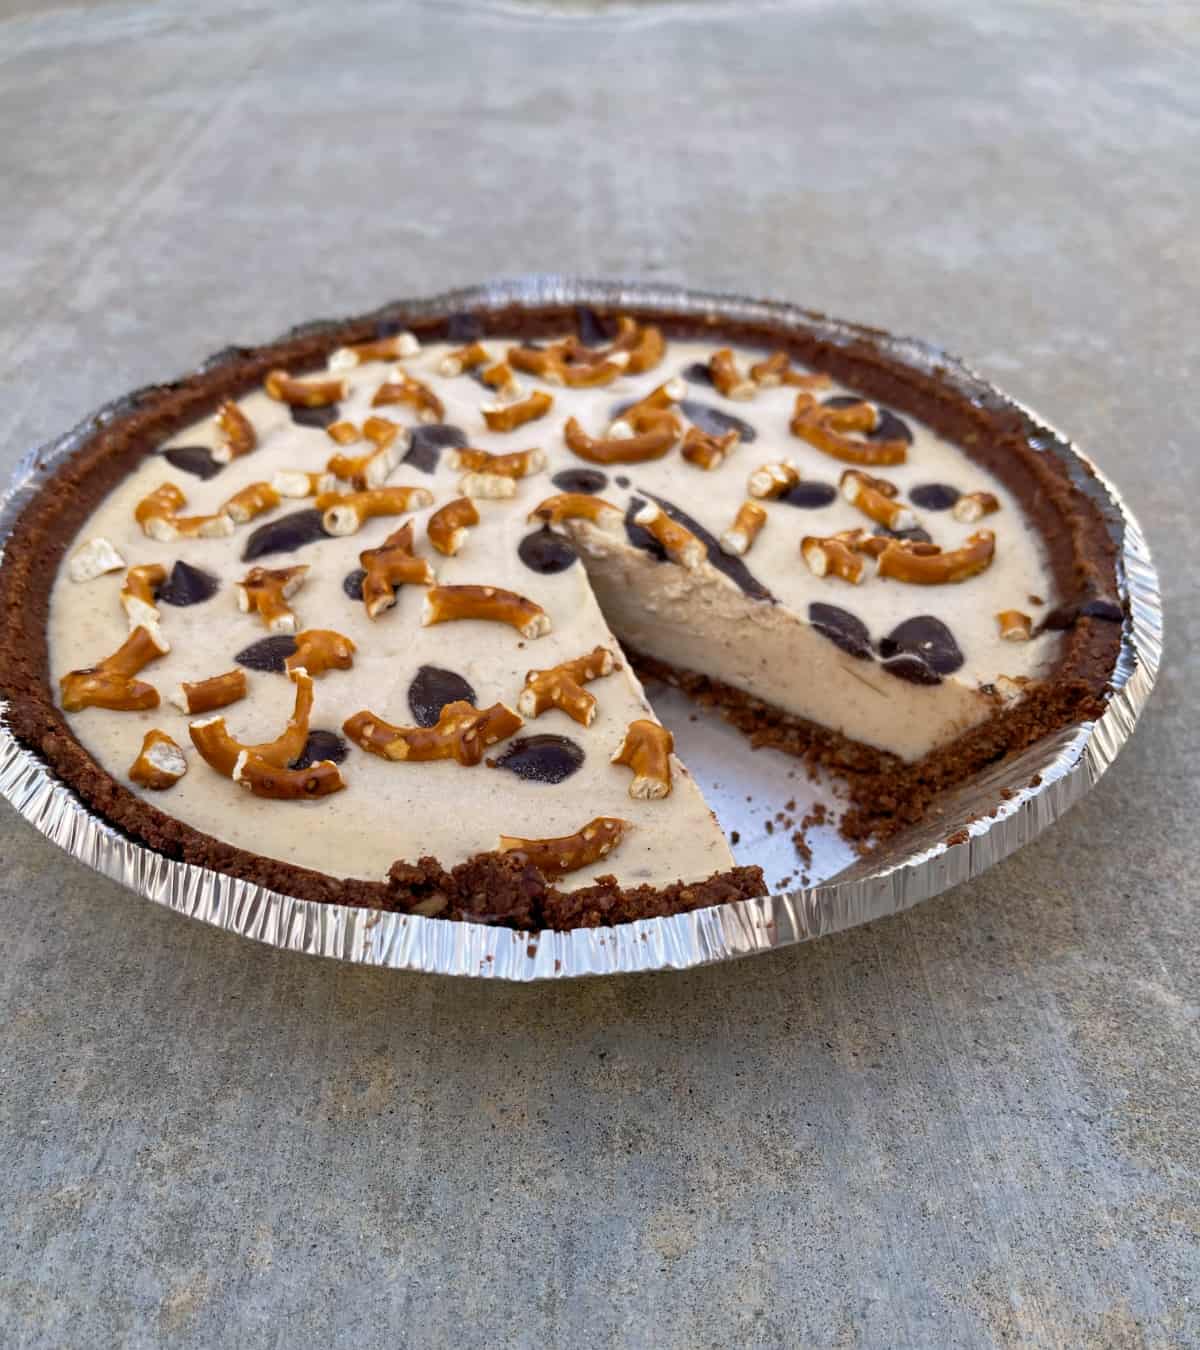 Frozen Peanut Butter Pie with one slice missing.